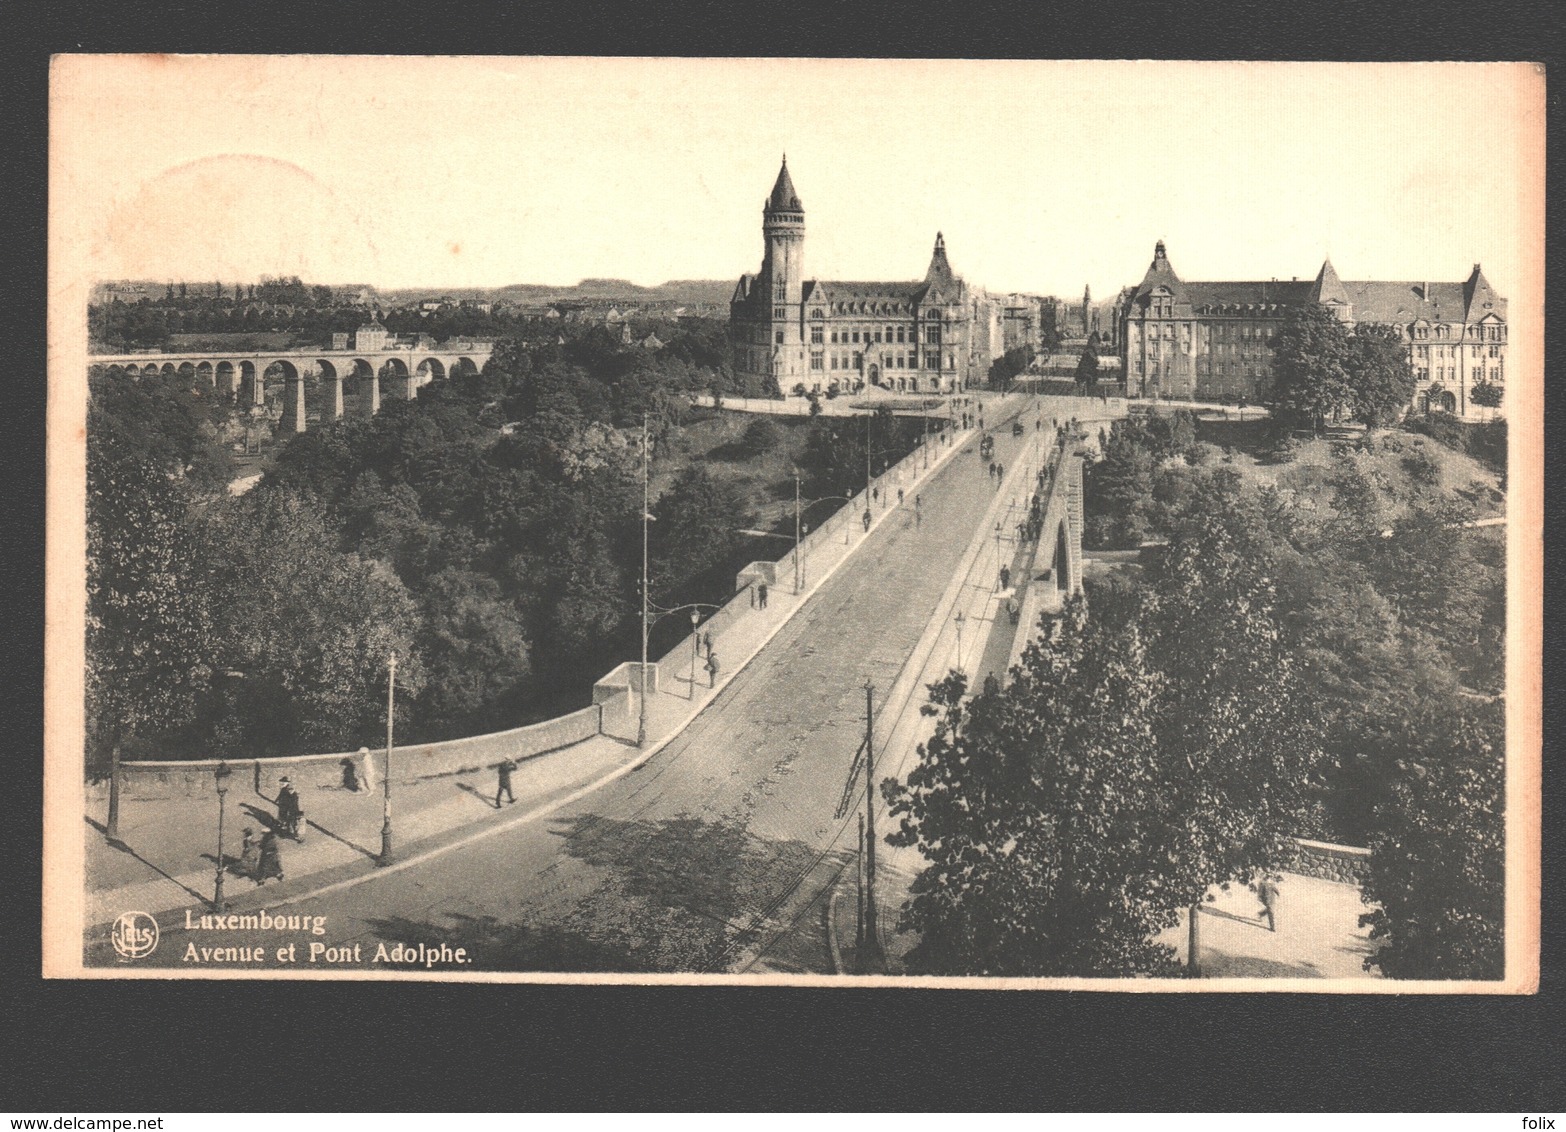 Luxembourg - Avenue Et Pont Adolphe - 1950 - Luxembourg - Ville